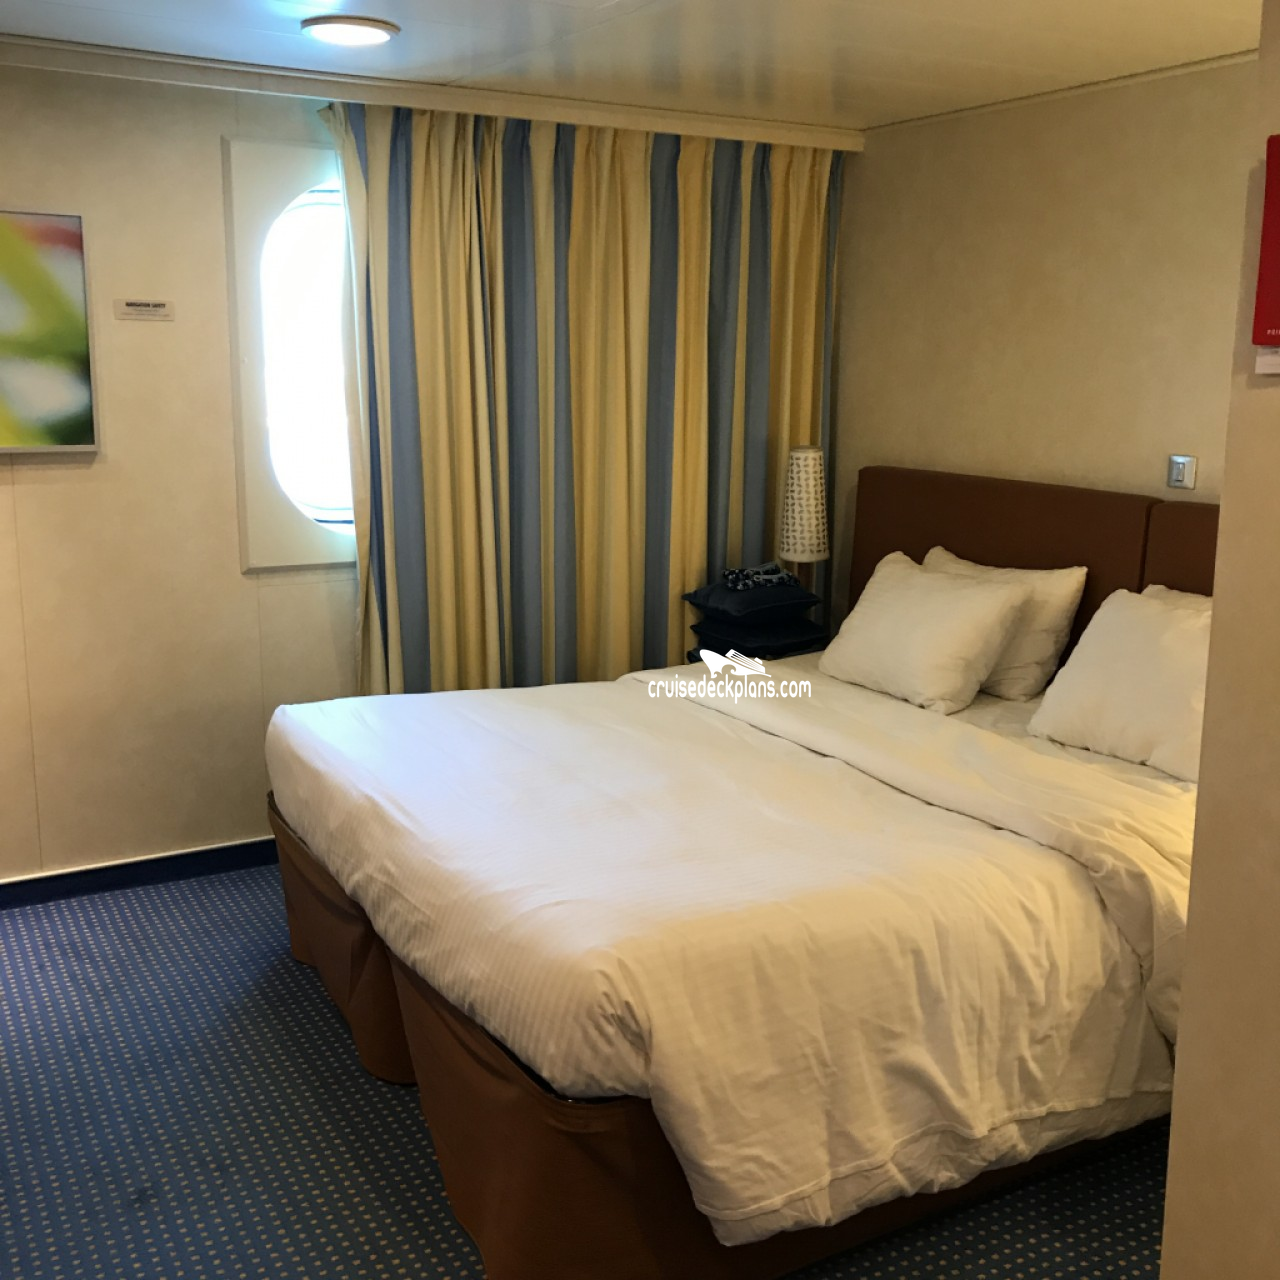 carnival cruise breeze room 2495